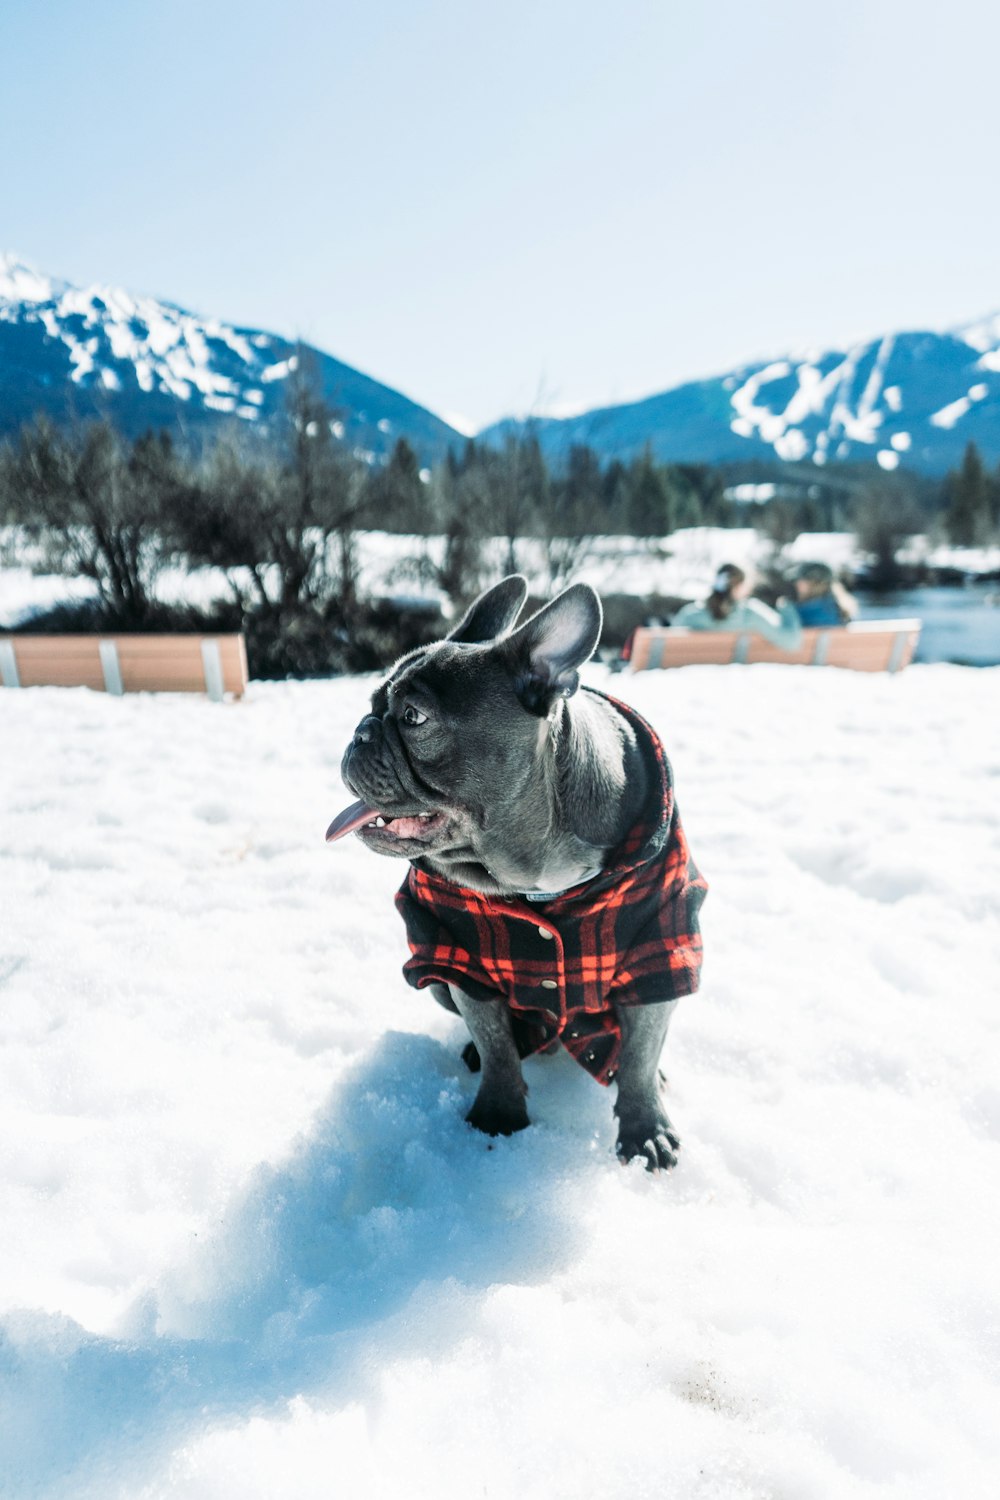 a small dog wearing a plaid shirt in the snow